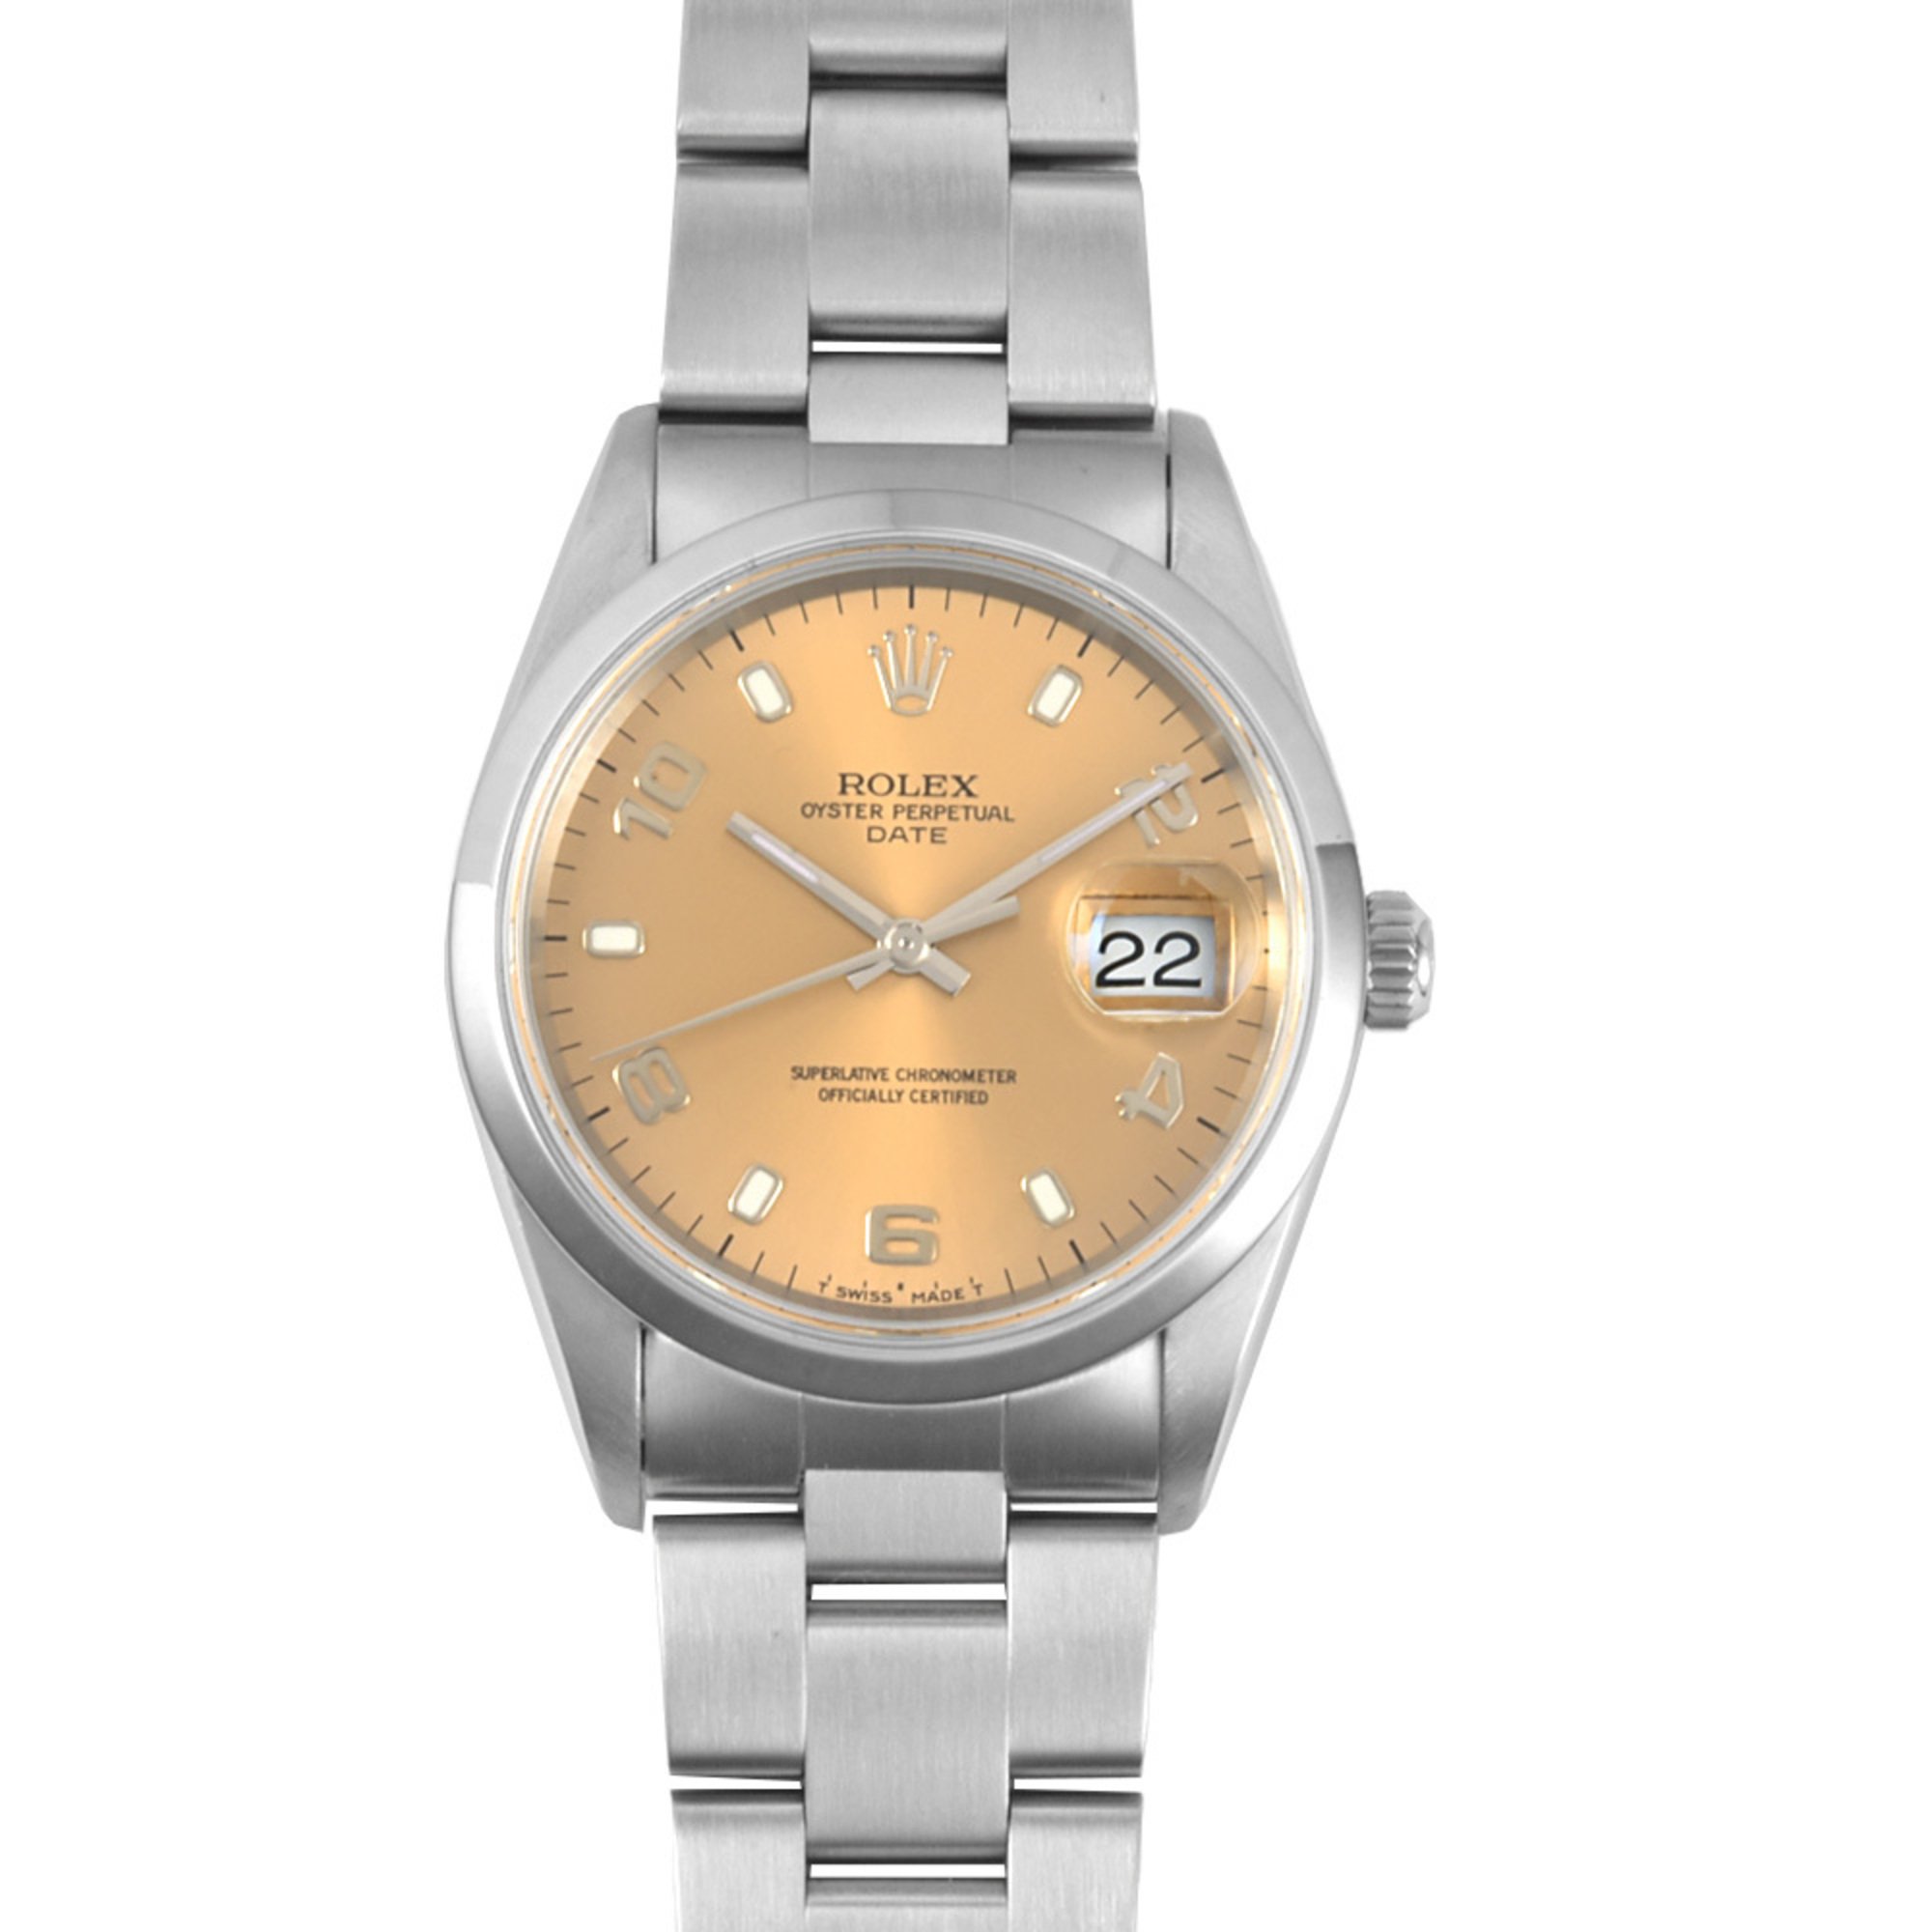 Rolex ROLEX 15200 Oyster Perpetual Date P series (manufactured in 1997) Automatic watch, pink dial, men's